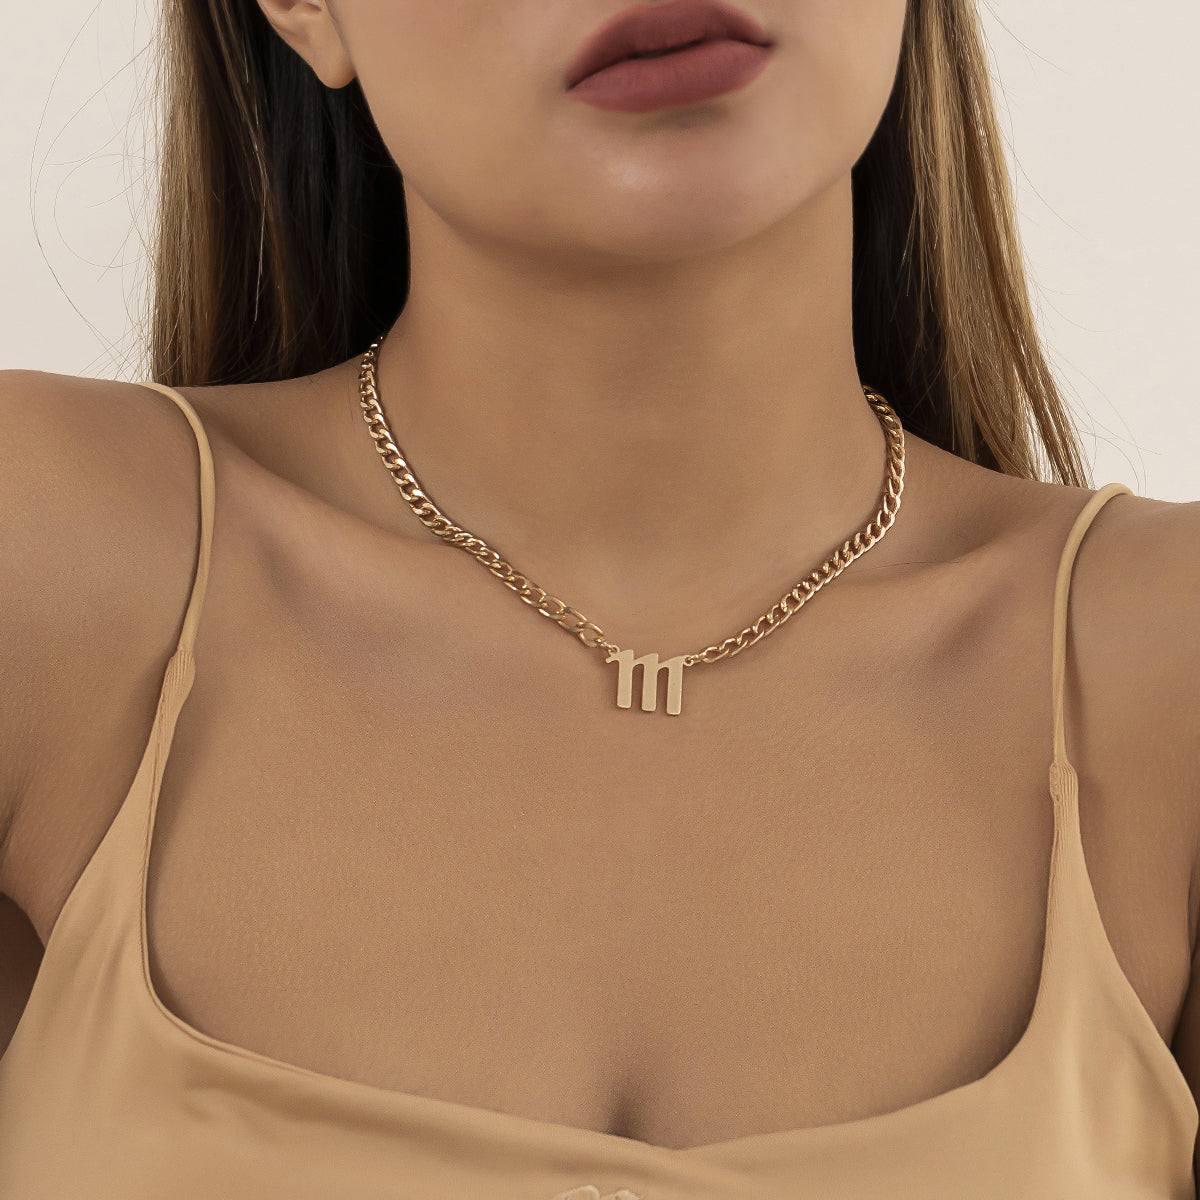 18K Gold-Plated '111' Curb Chain Pendant Necklace